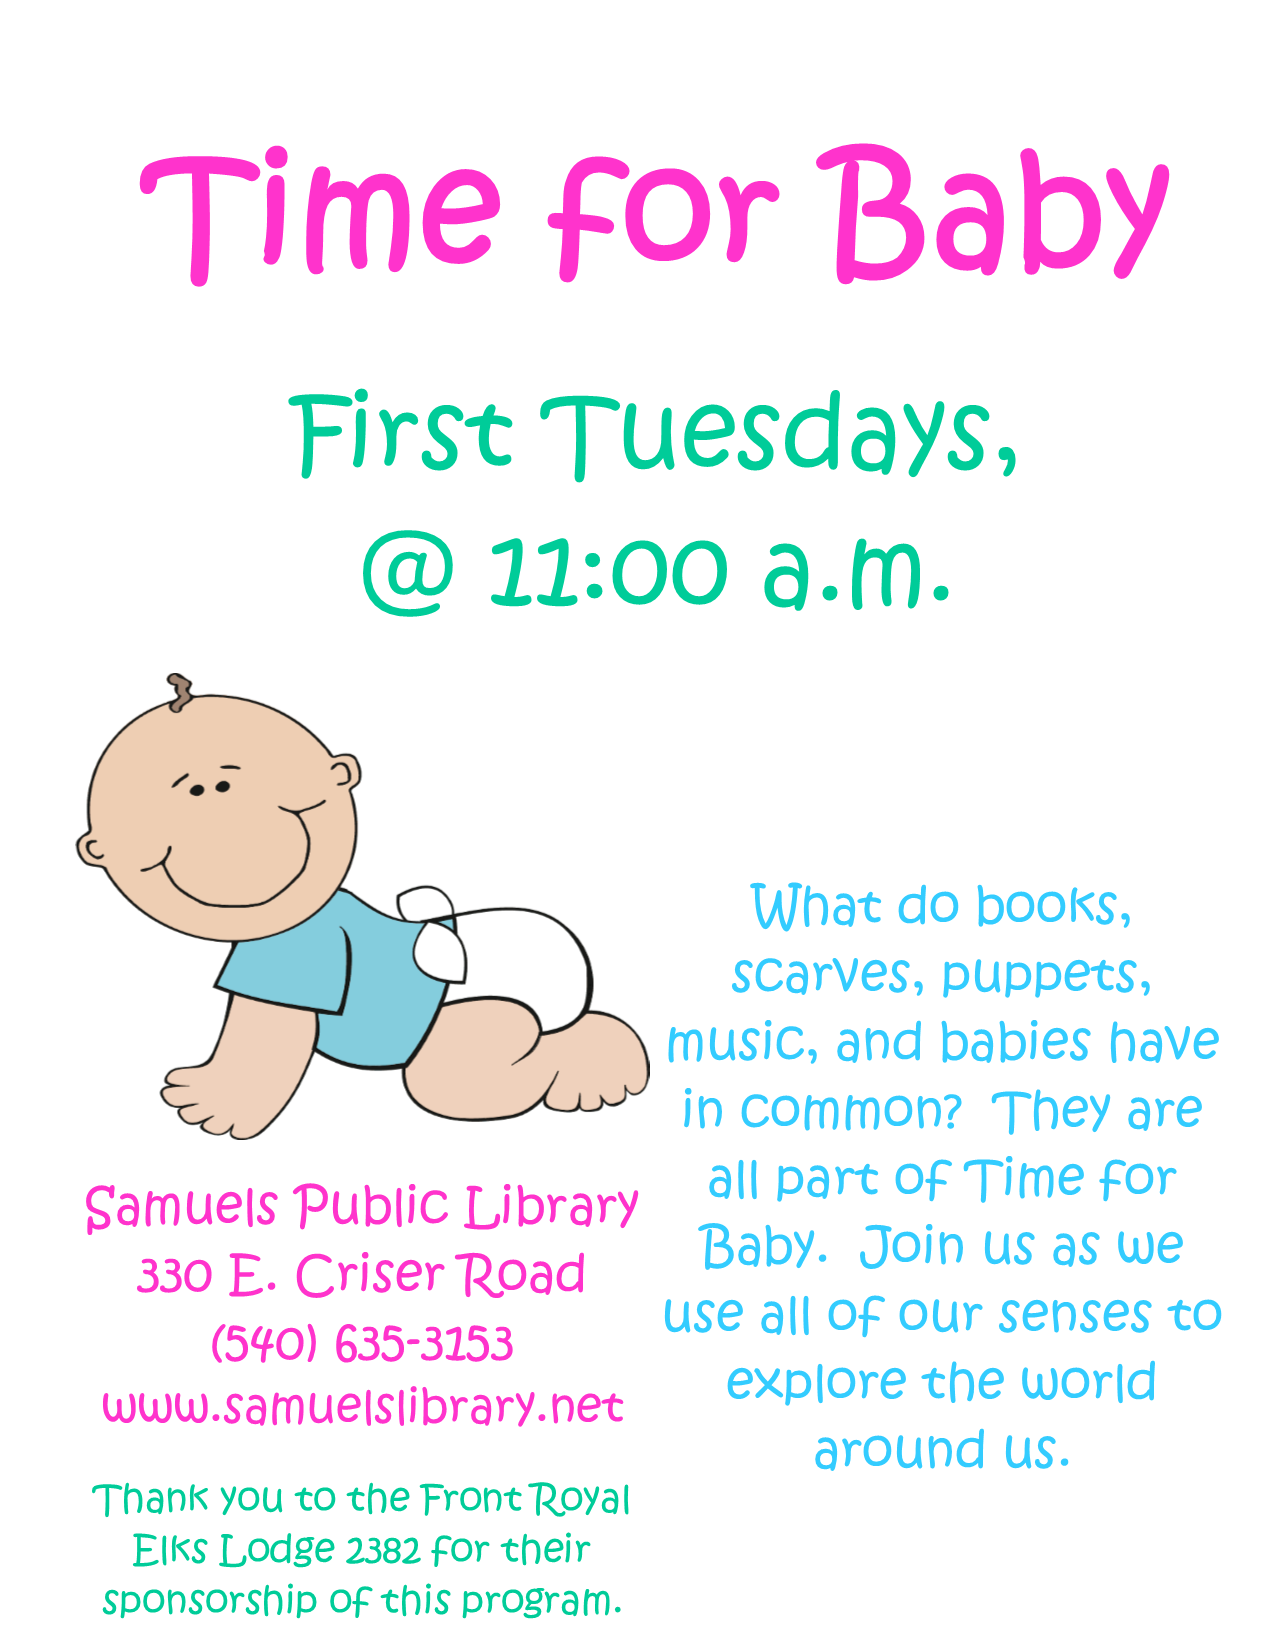 Time for Baby, Tuesday, May 5 at 11:00 A.M.